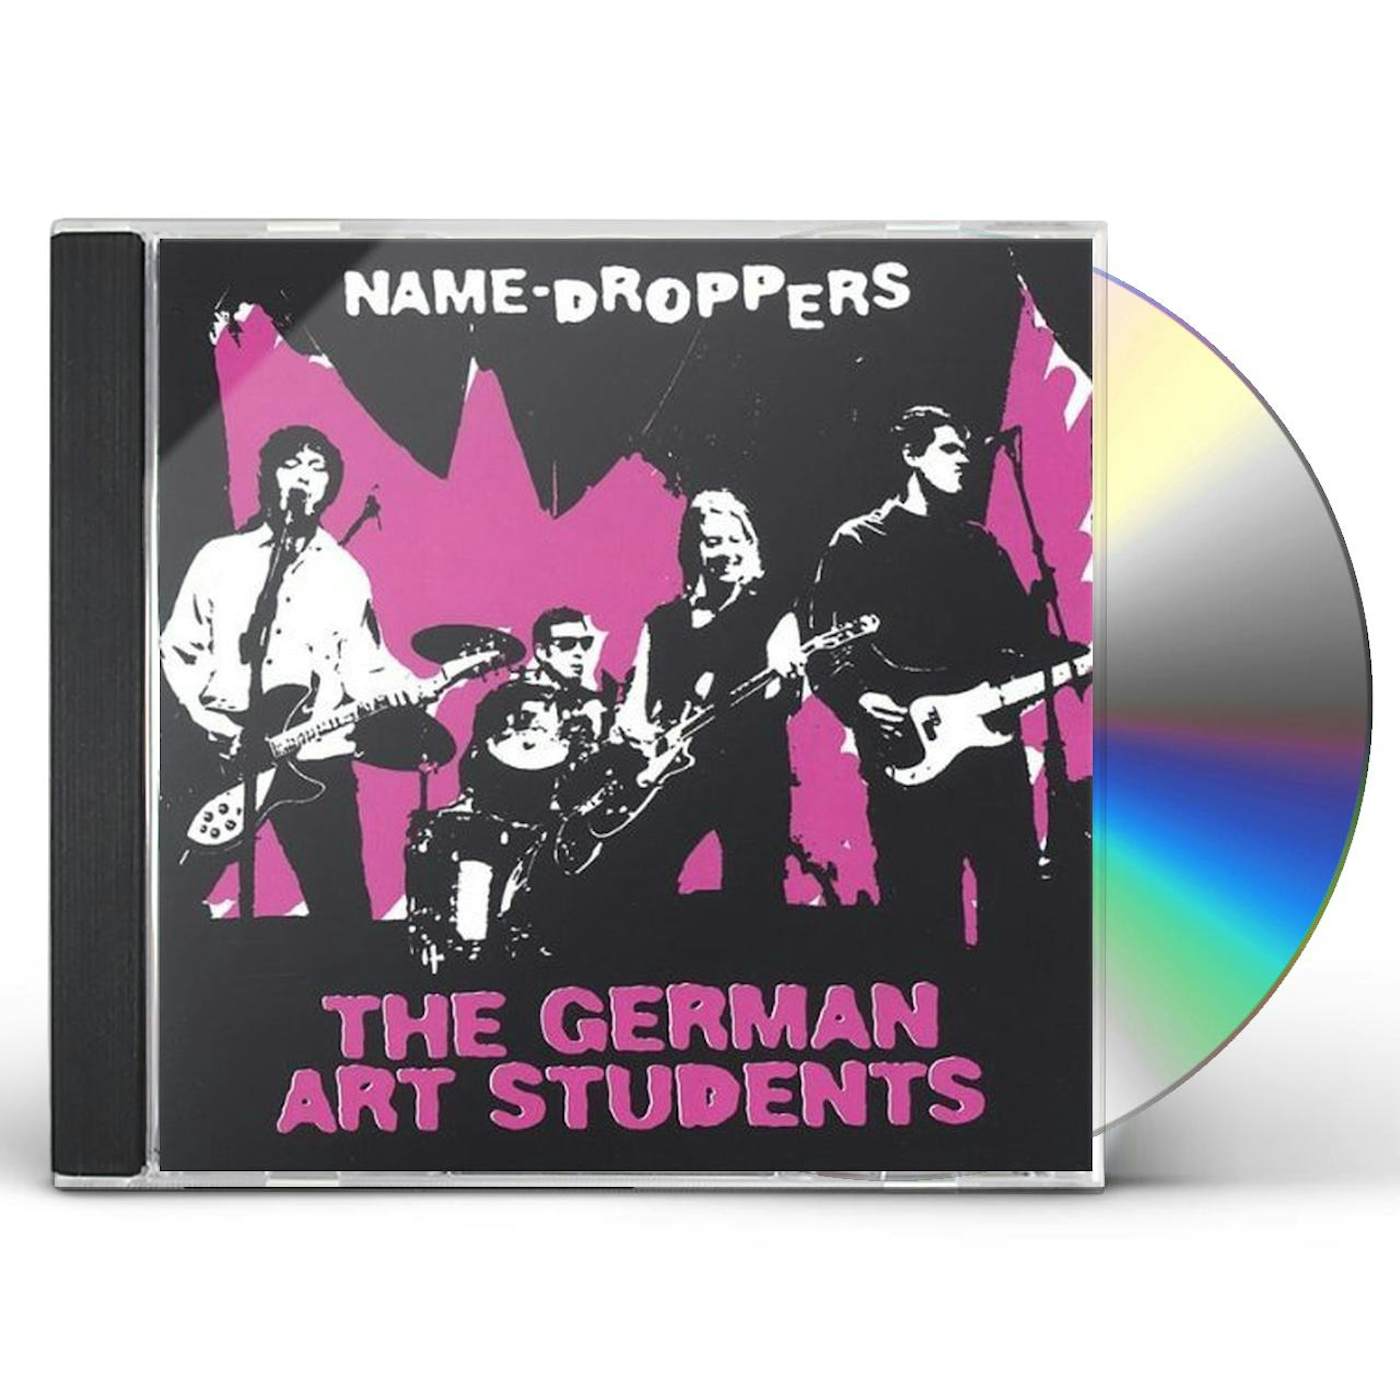 The German Art Students NAME-DROPPERS CD